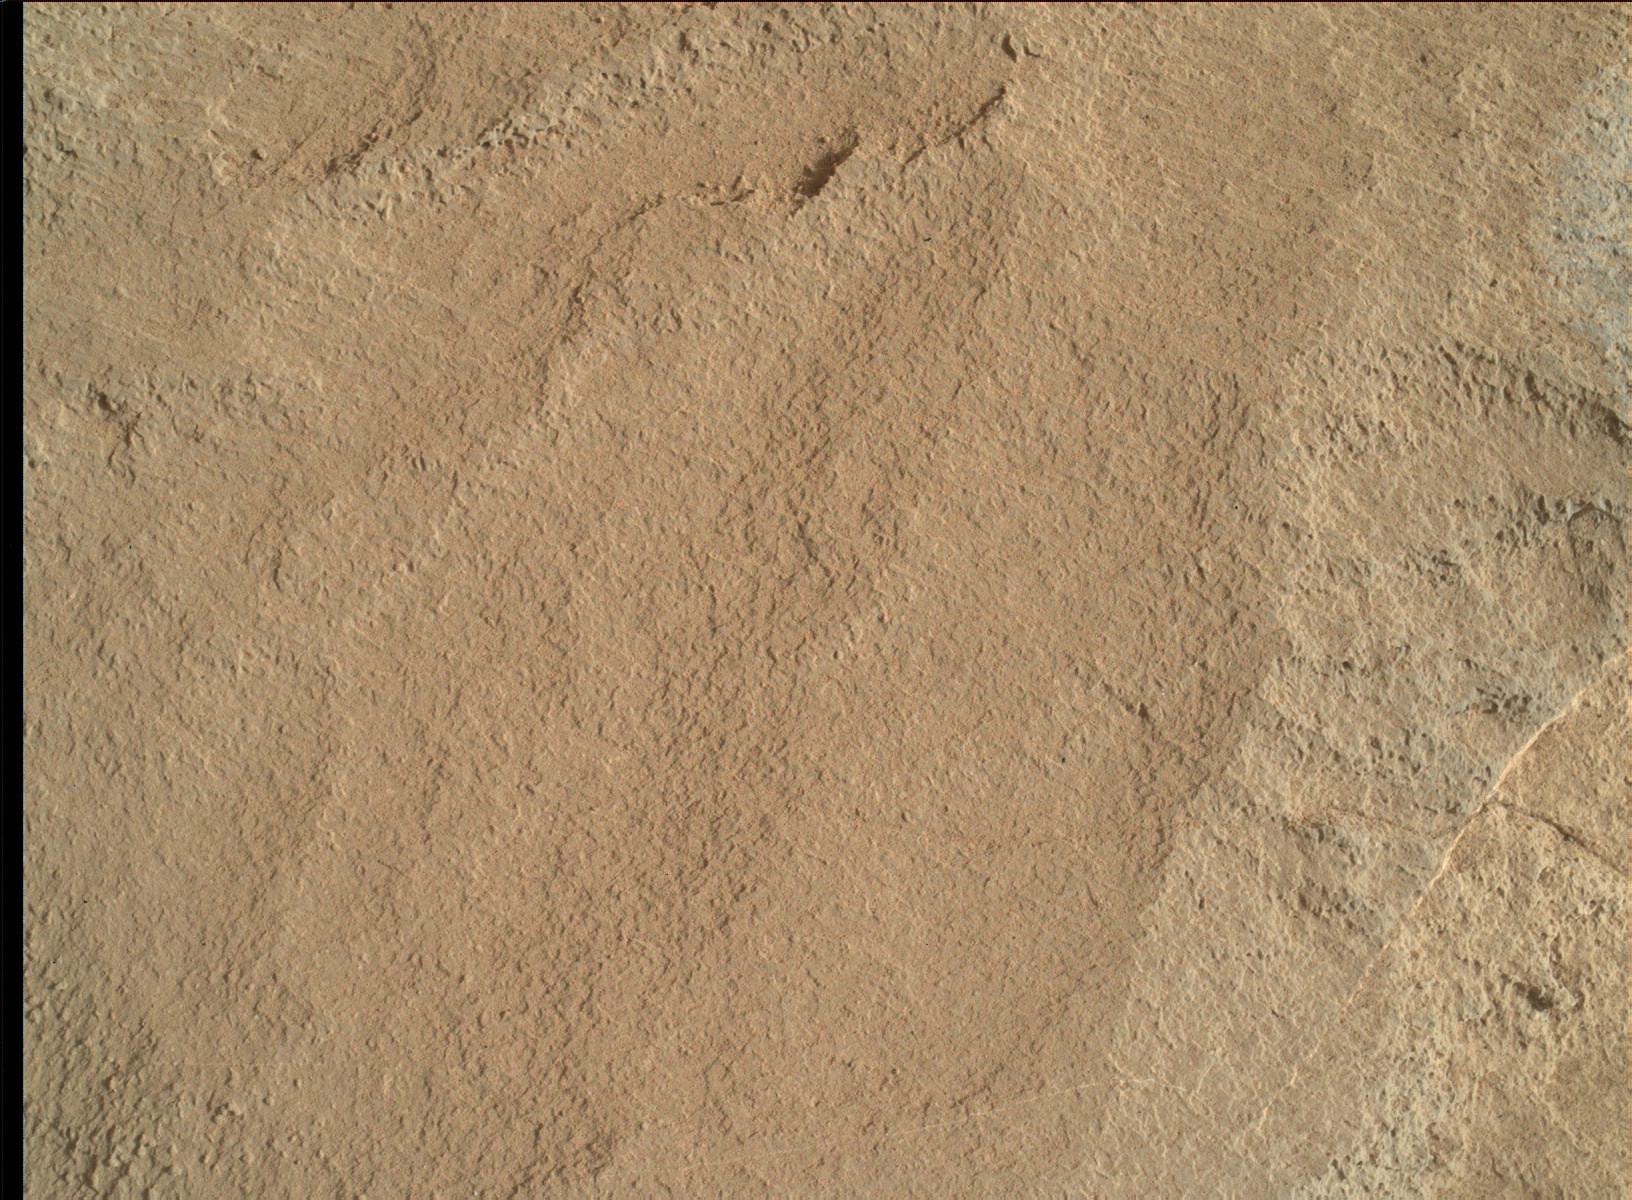 Nasa's Mars rover Curiosity acquired this image using its Mars Hand Lens Imager (MAHLI) on Sol 1109